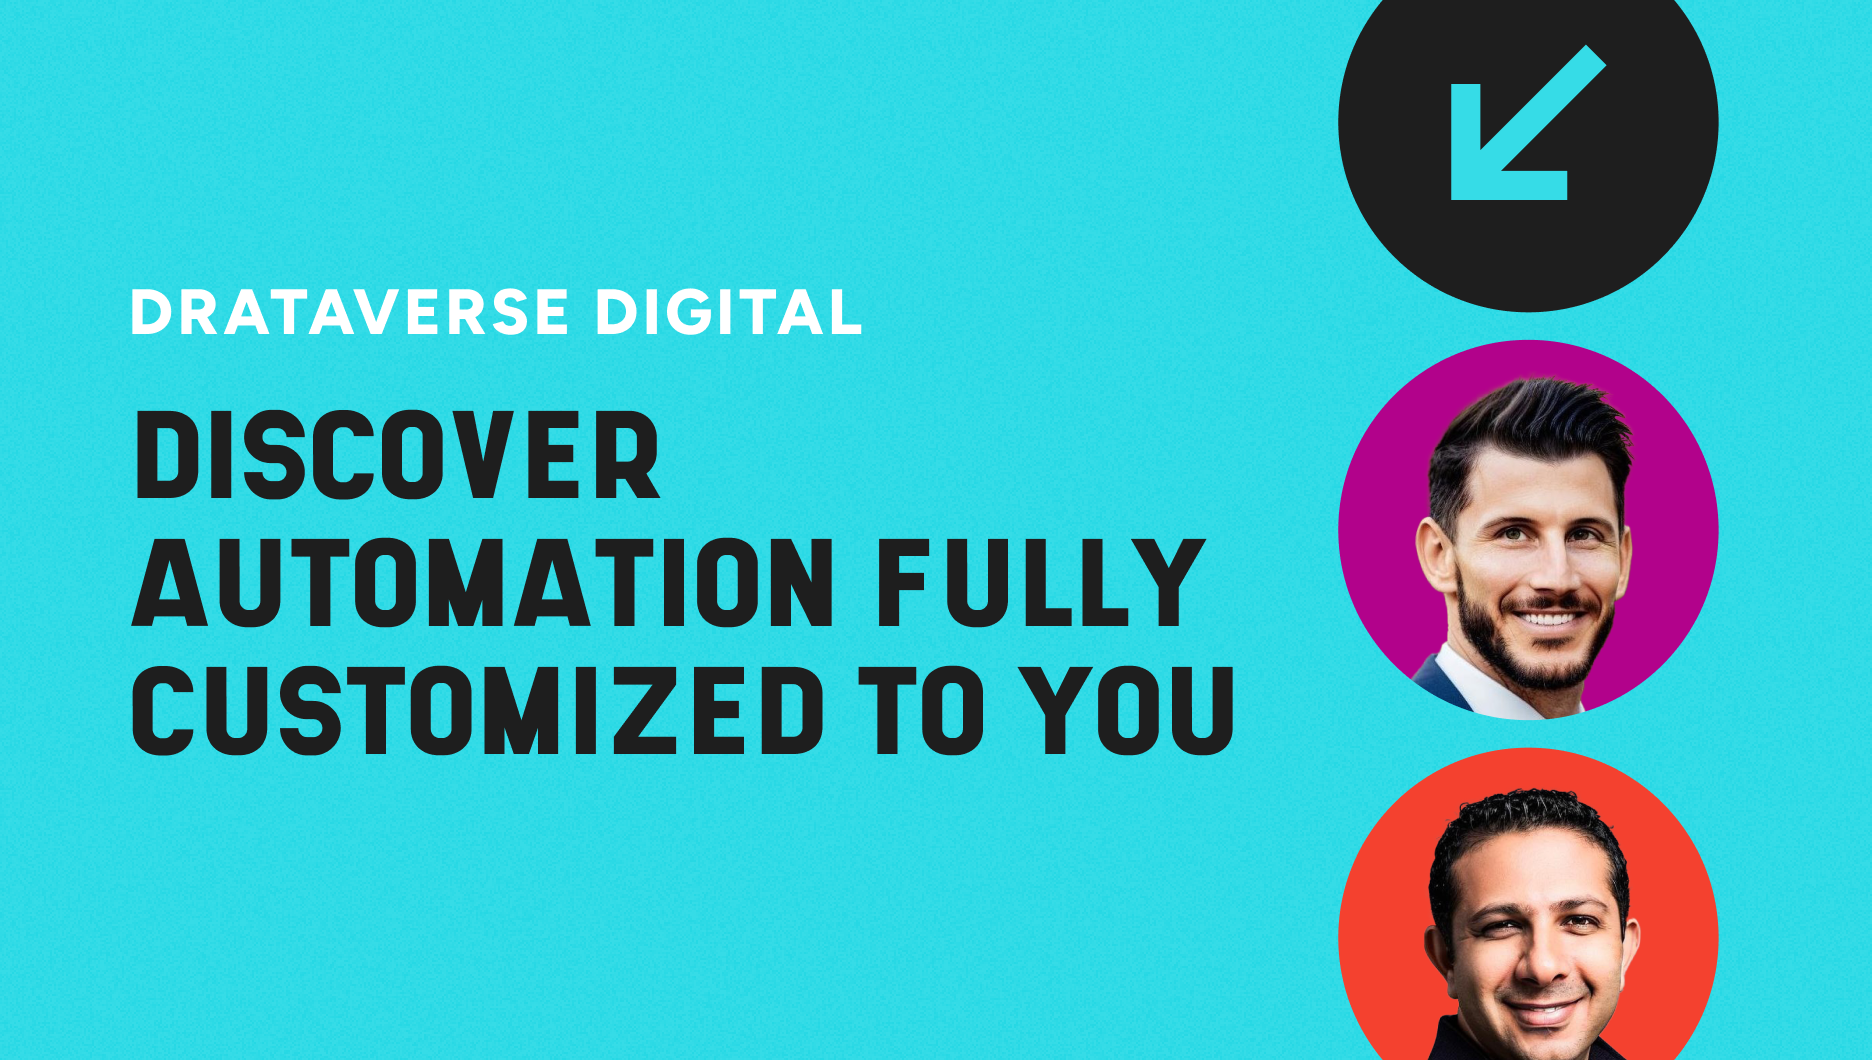 Discover Automation Fully Customized to You